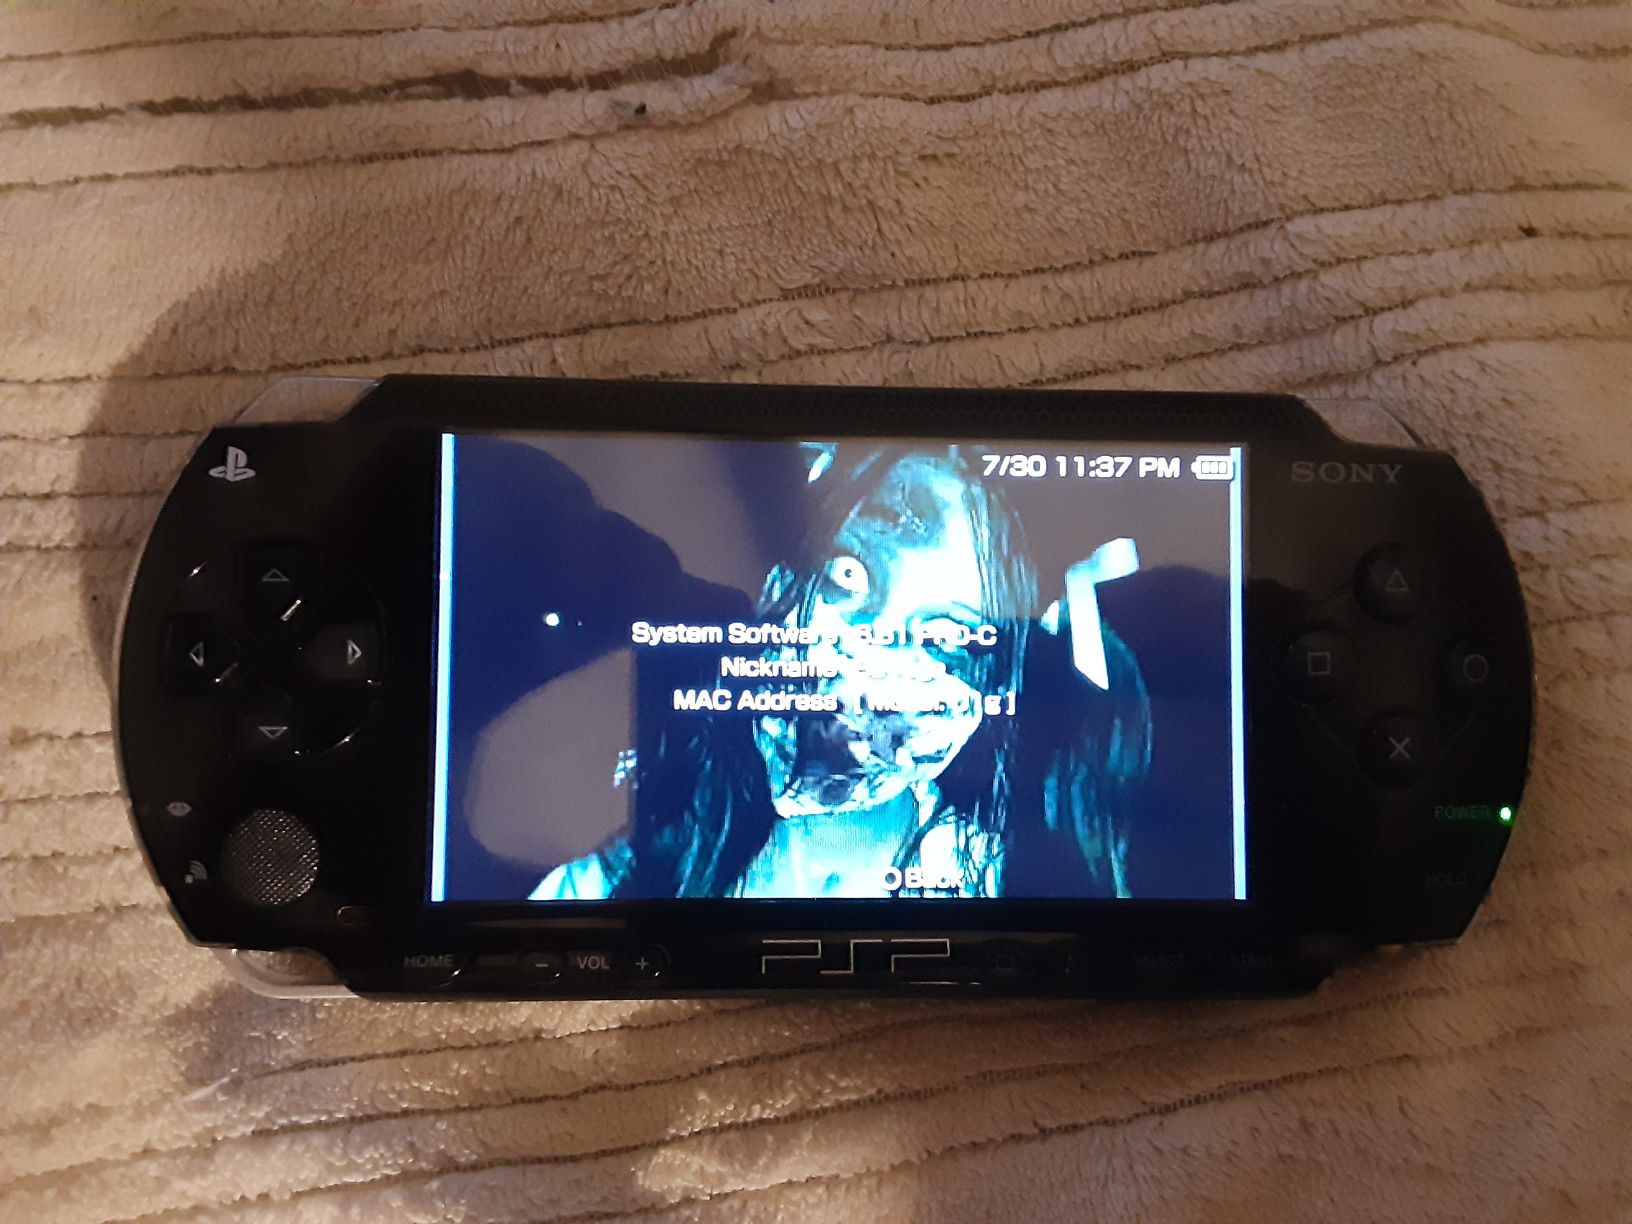 Fully modded psp with 122 games on it